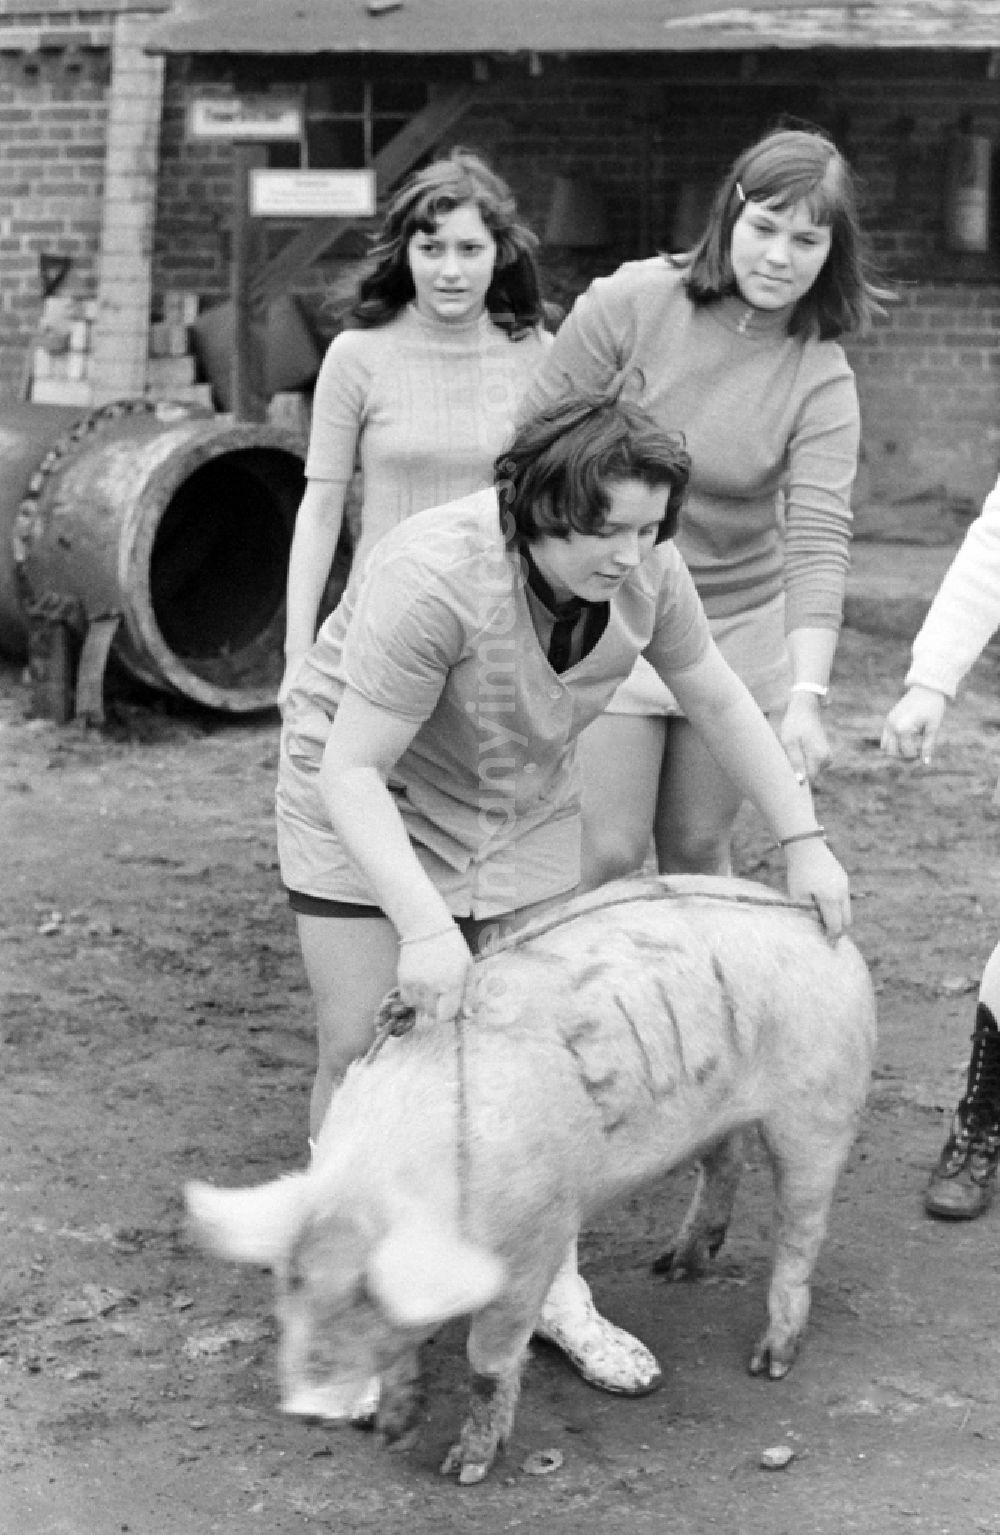 Spremberg: Girls with the pig Elli in Spremberg in the state Brandenburg on the territory of the former GDR, German Democratic Republic